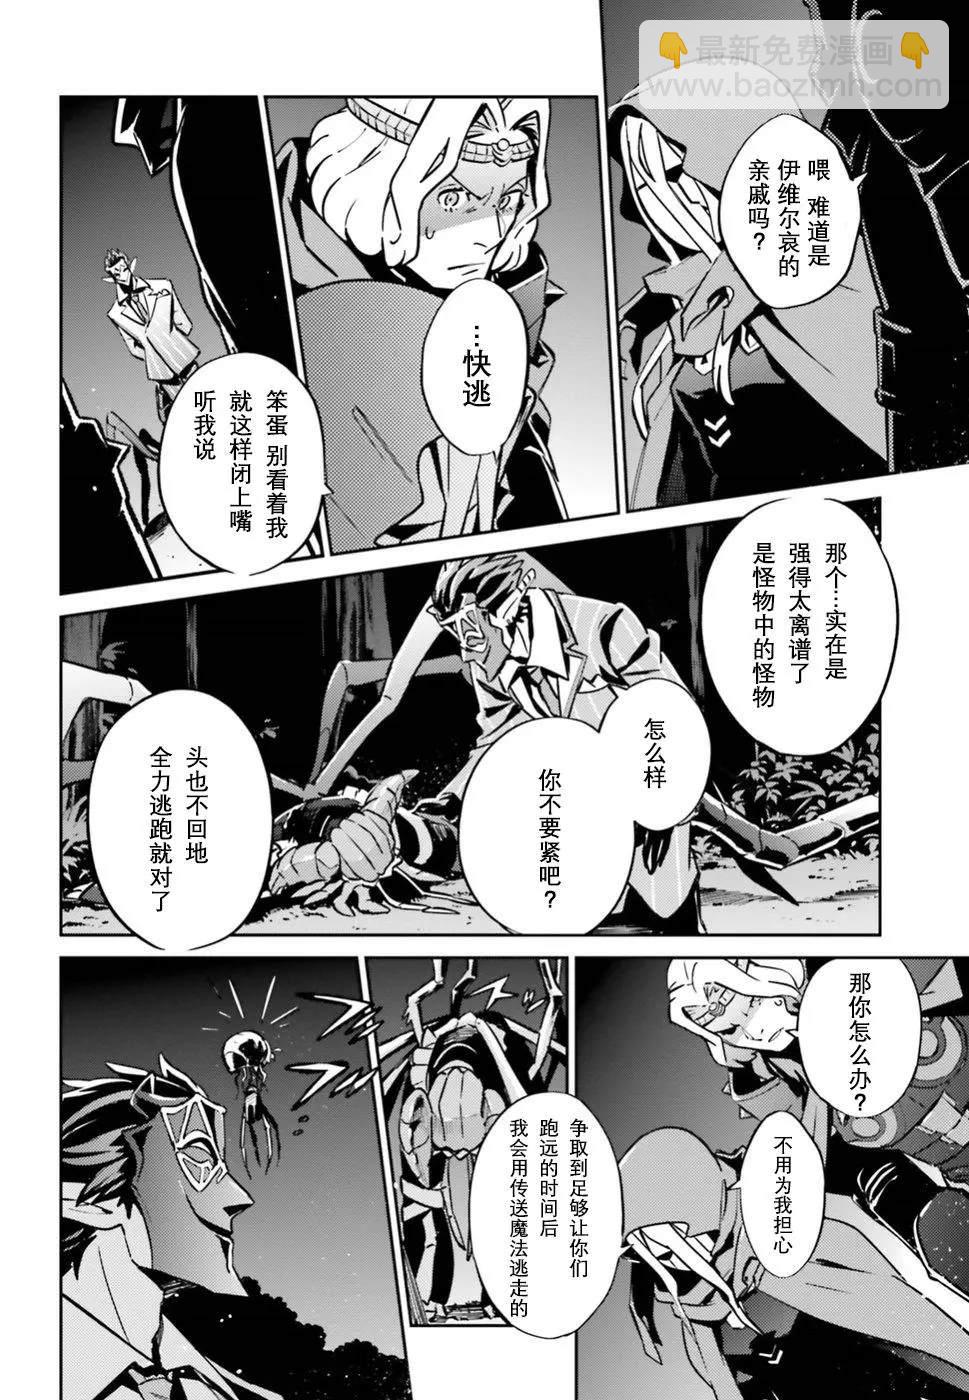 OVERLORD - 第46話 - 5